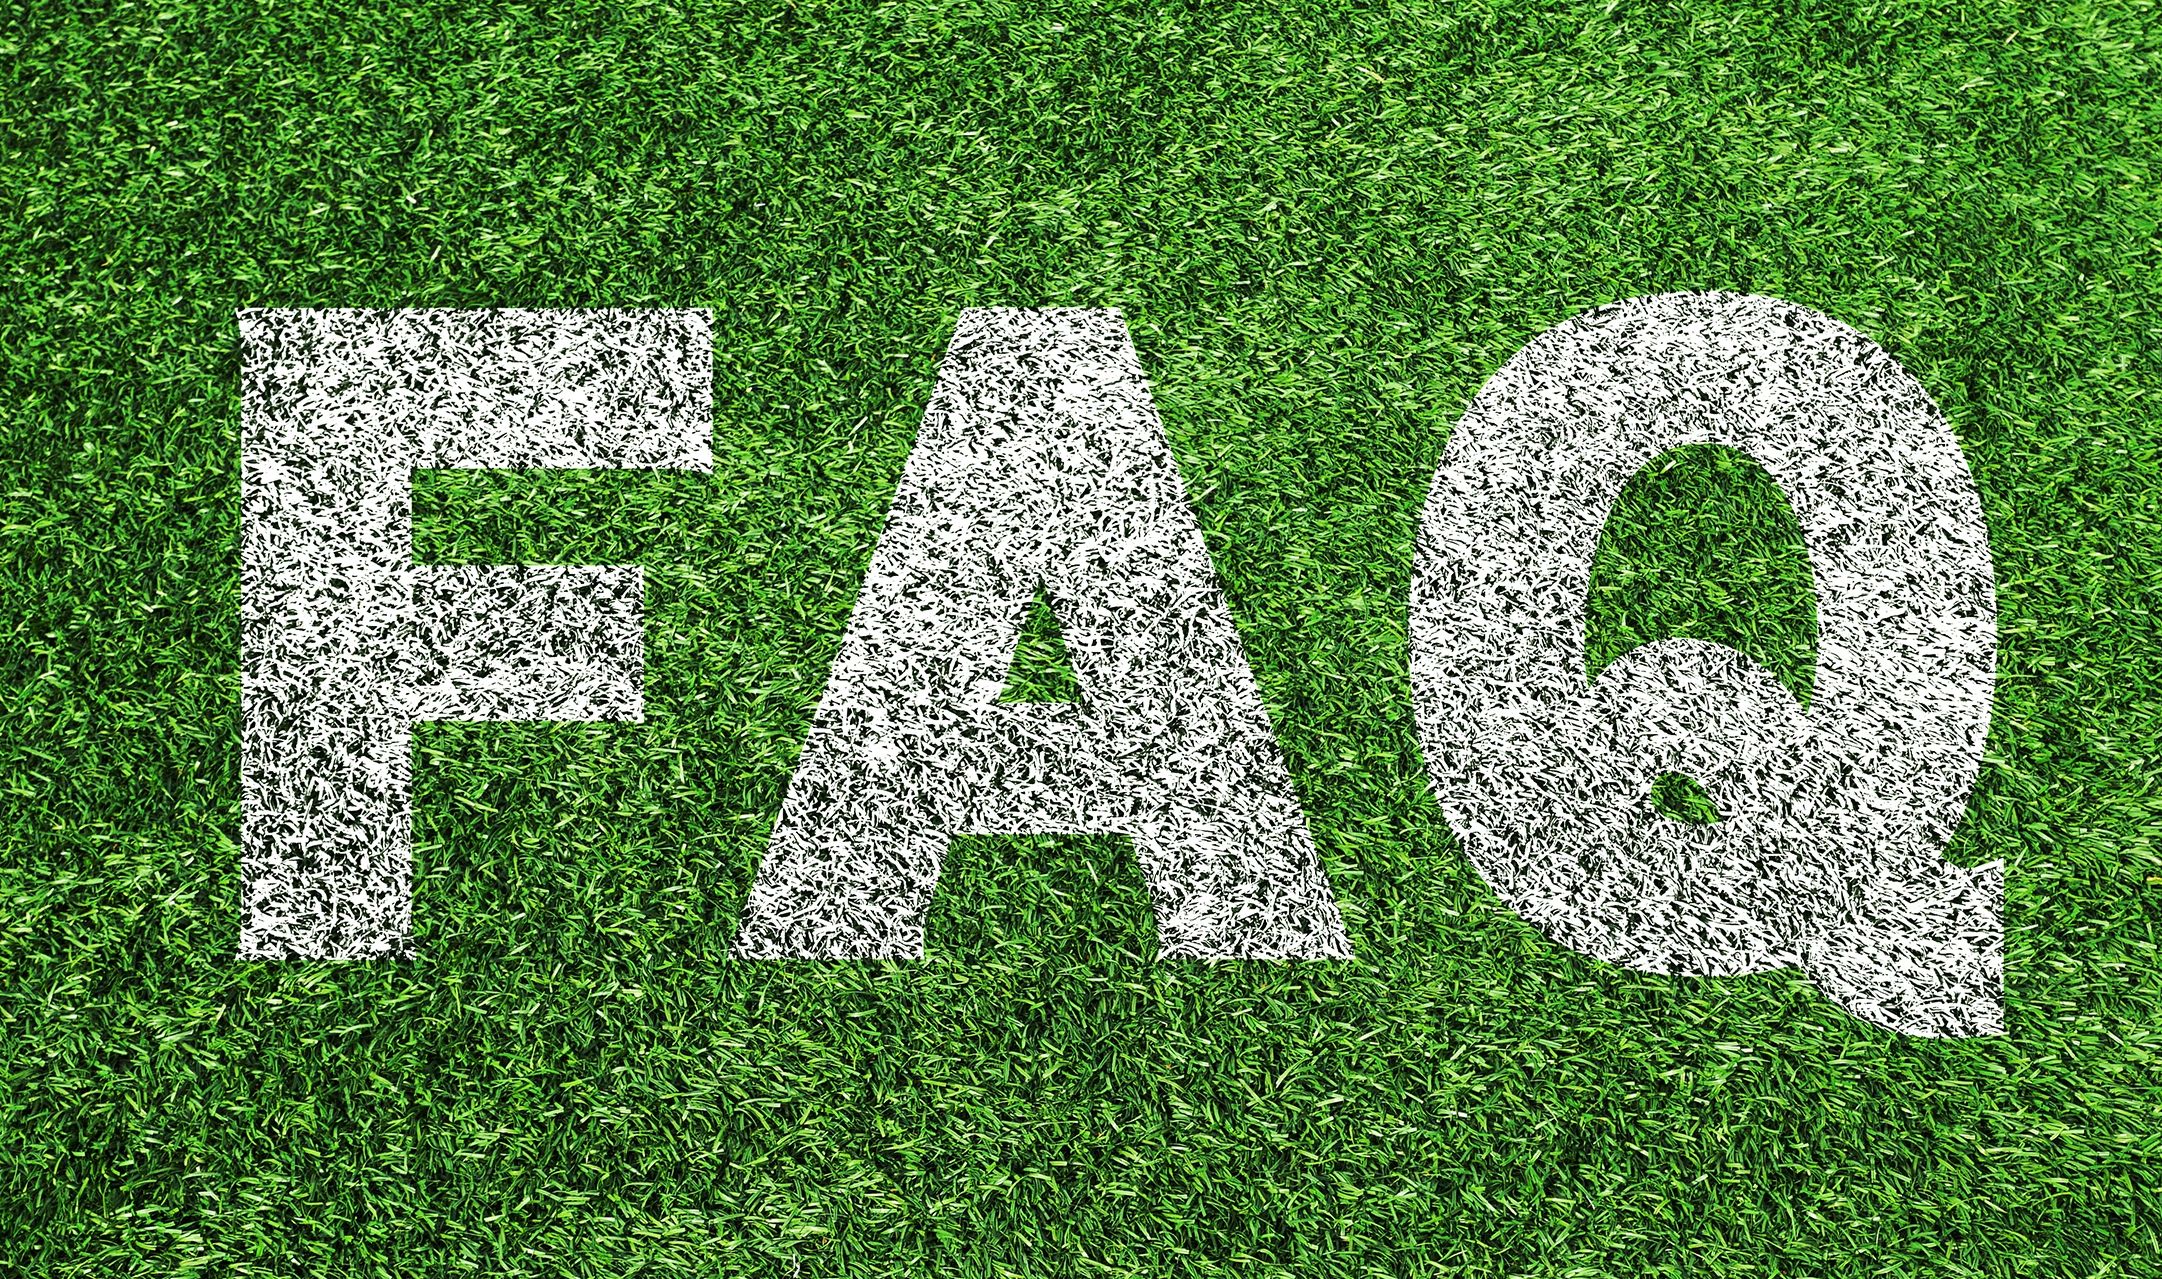 FAQ in white letters on grass background image. Frequently asked questions